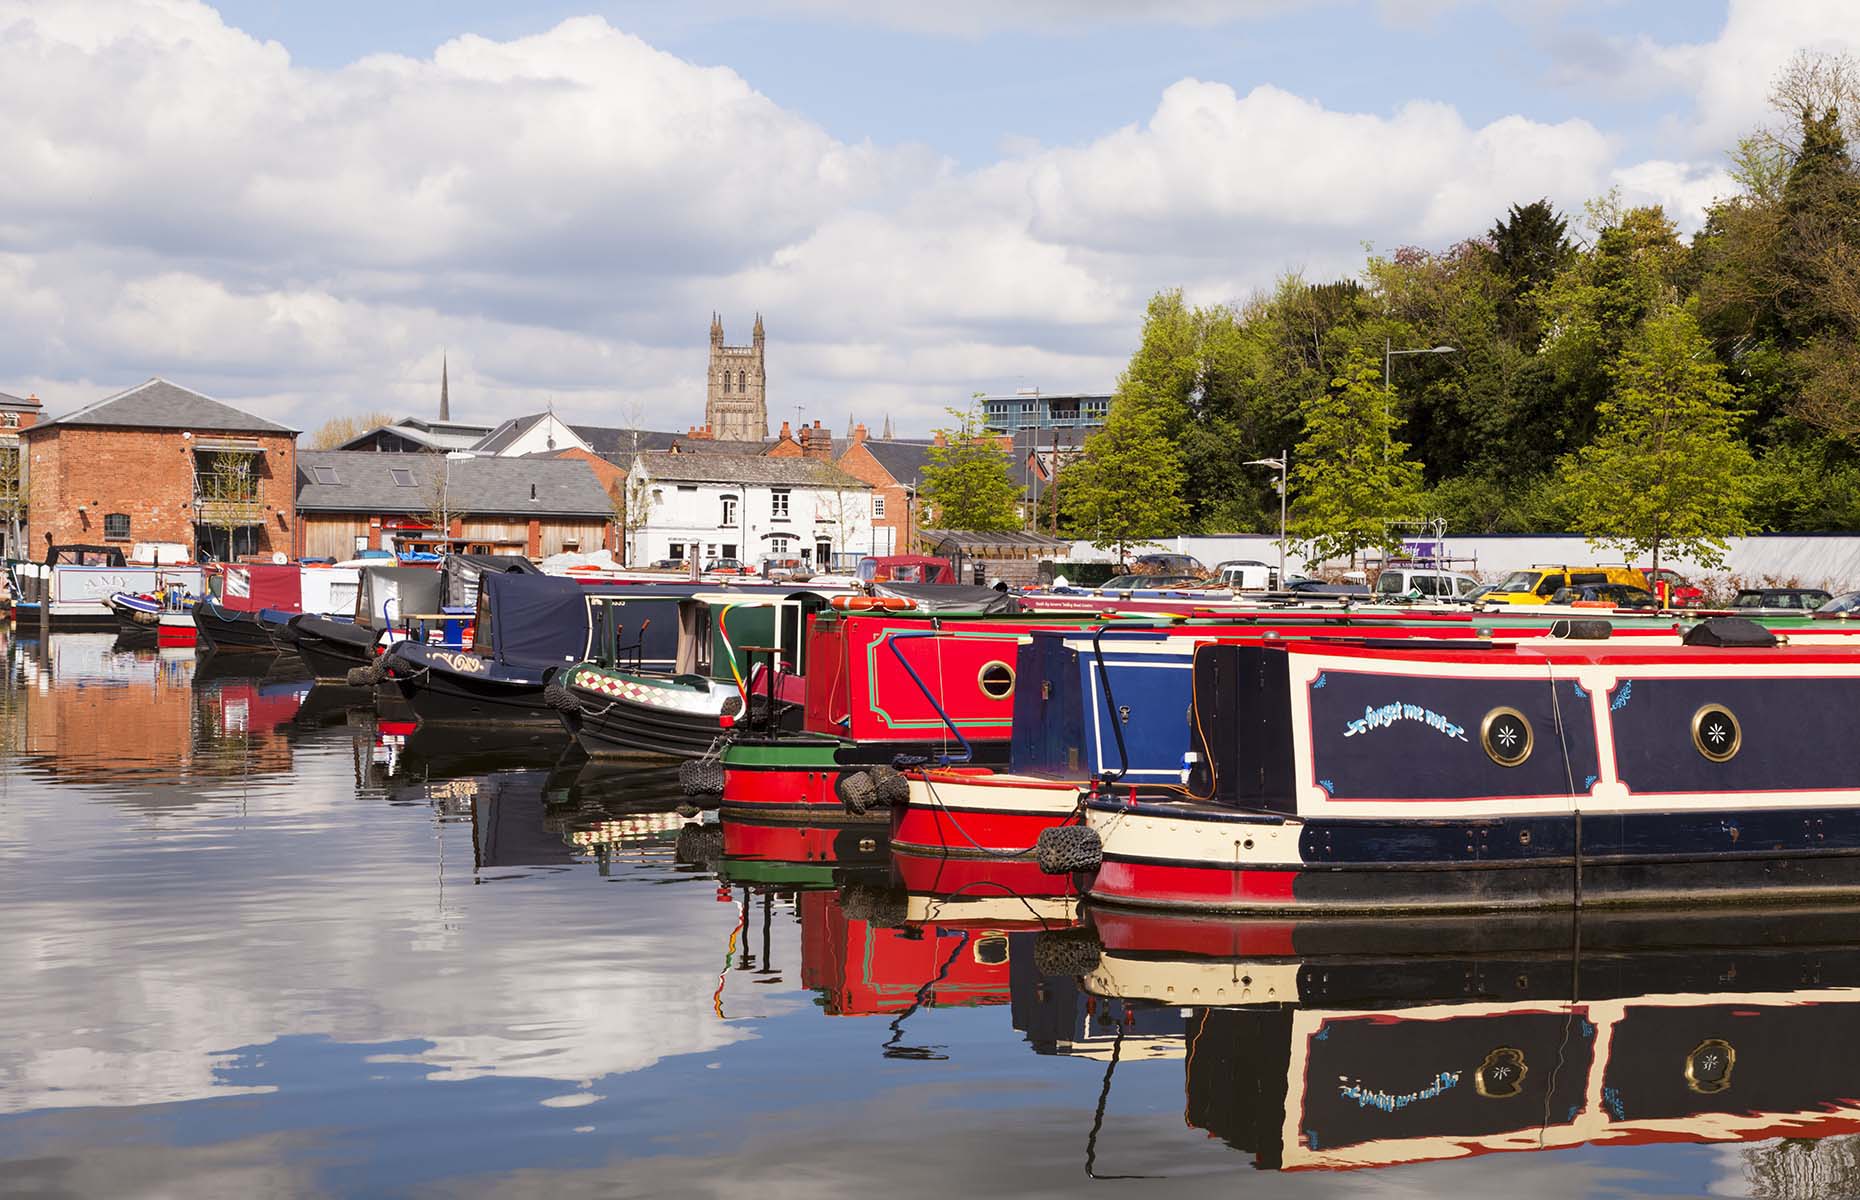 Diglis Basin in Worcester (Image: travellight/Shutterstock)